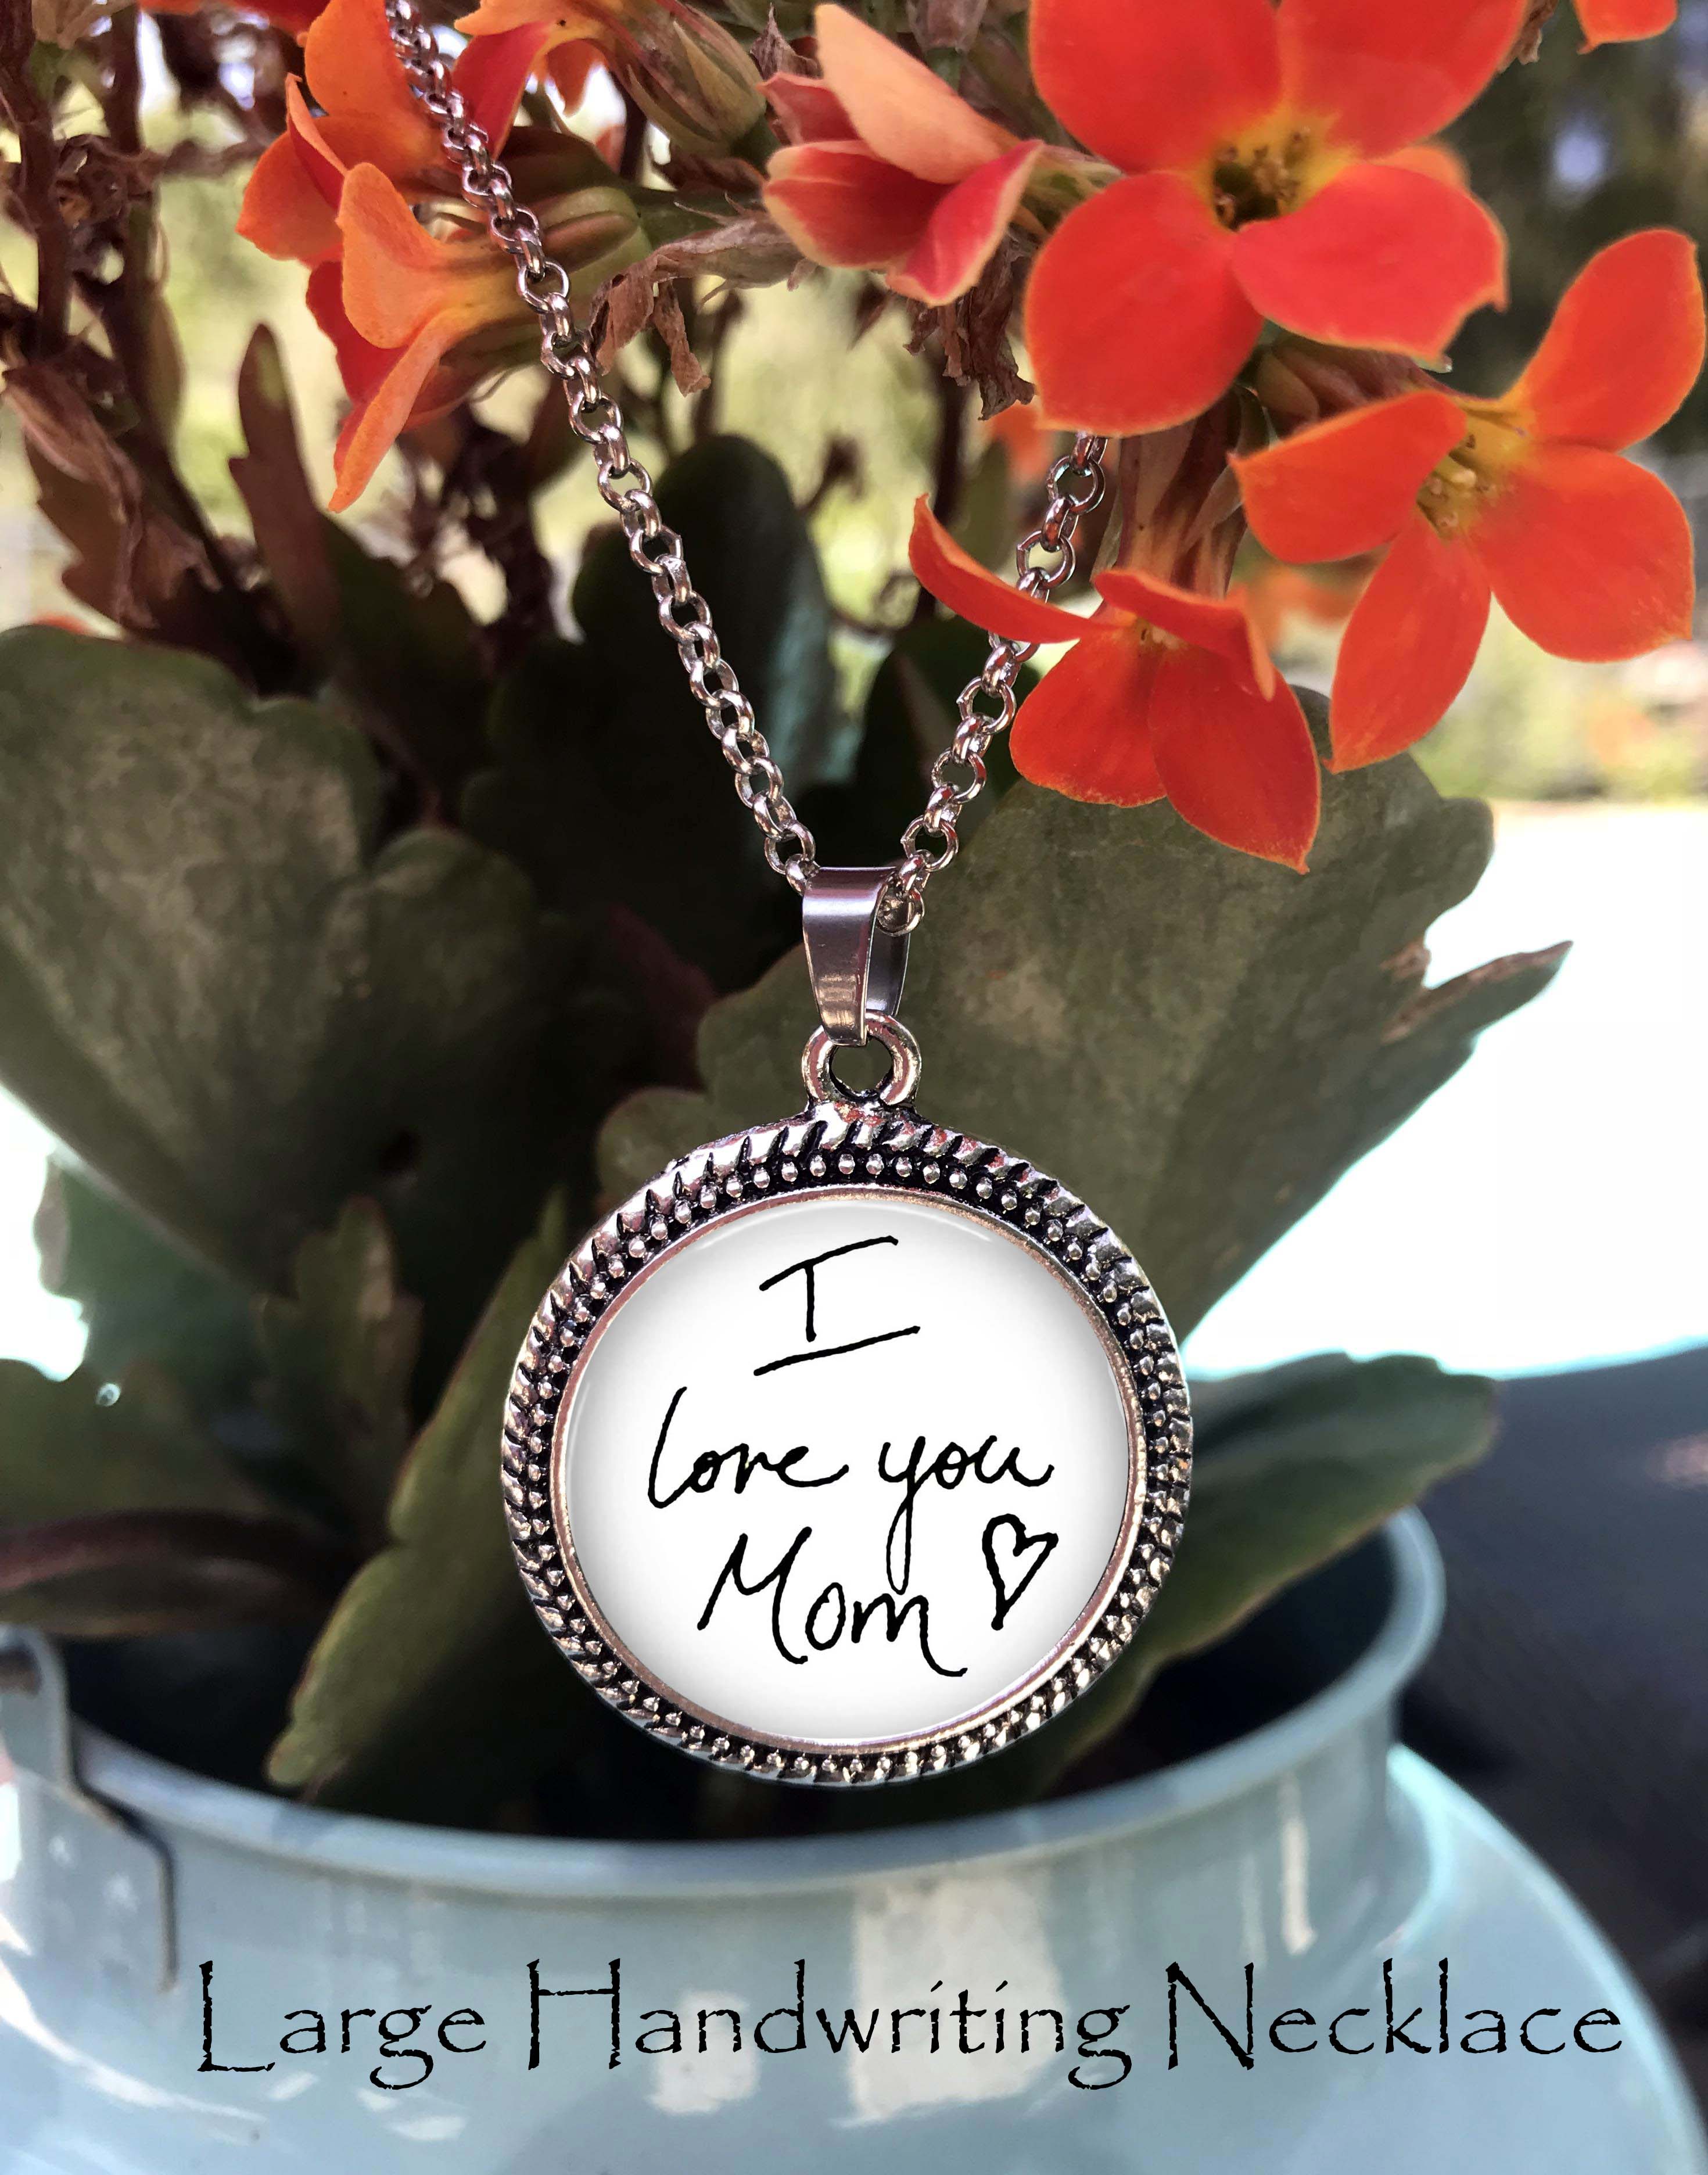 Actual Handwriting Necklace - Customised Jewellery With Handwriting